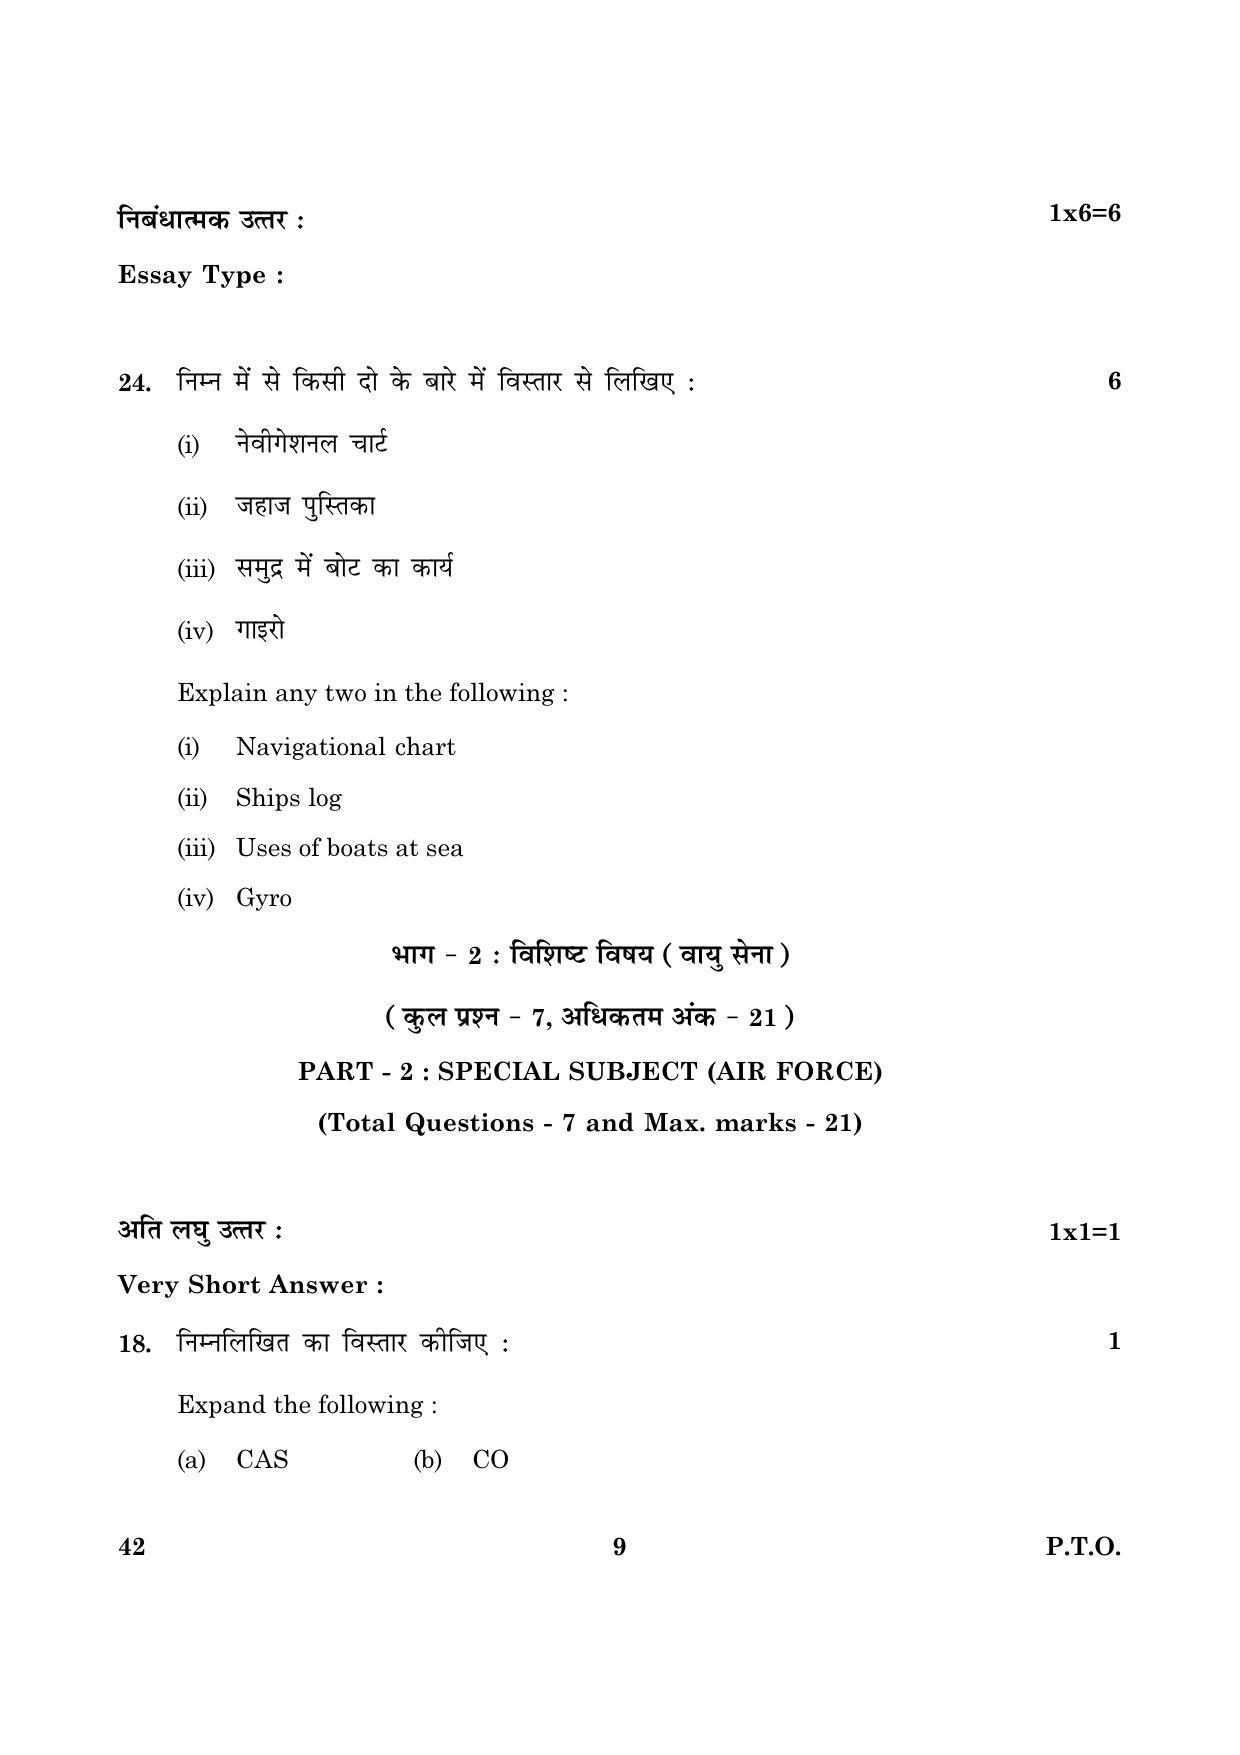 CBSE Class 12 042 National Cadet Corps (NCC) 2016 Question Paper - Page 9